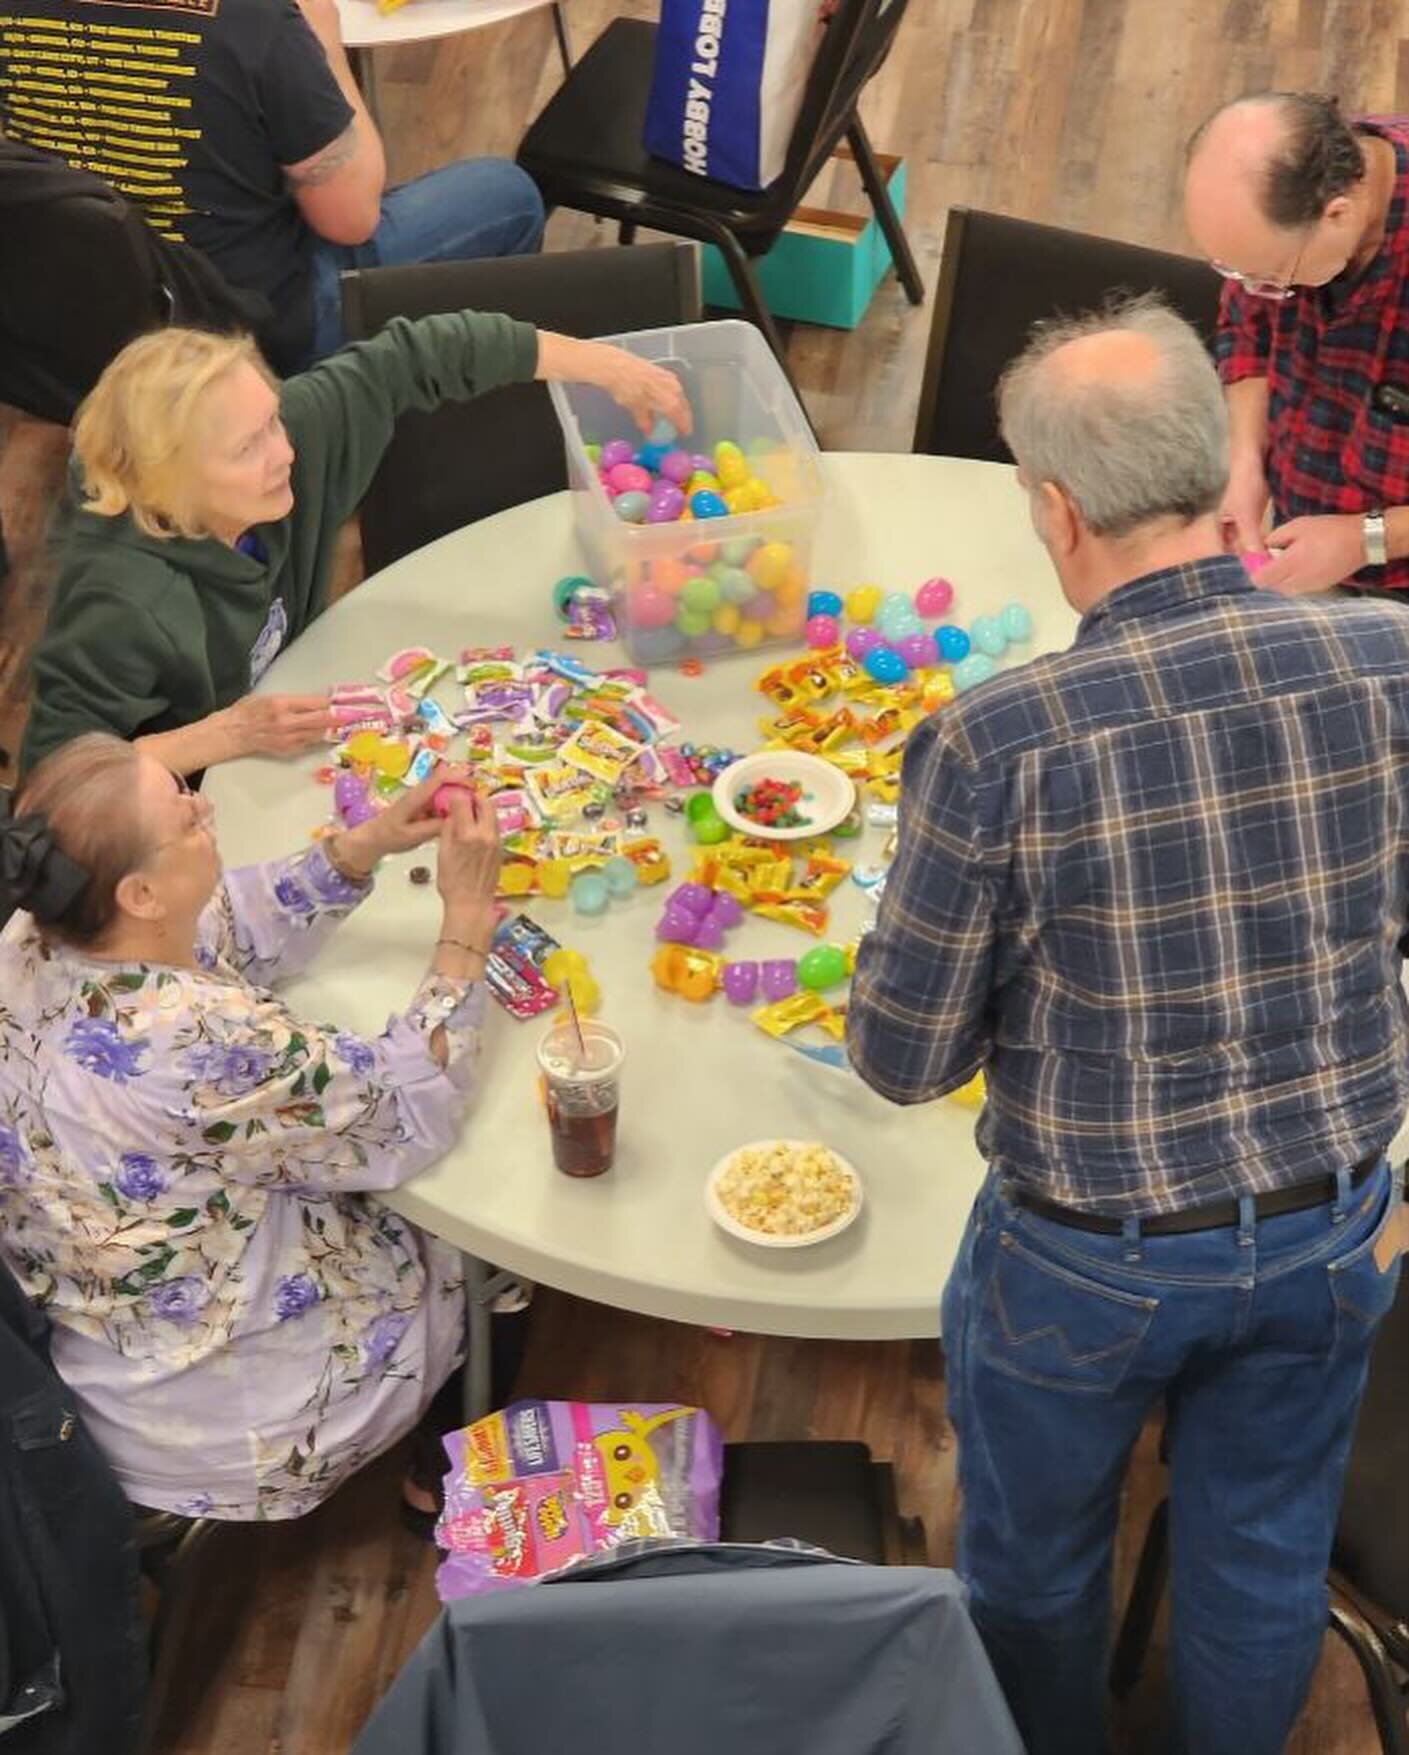 This week several community groups gathered to stuff eggs for our Community Egg Hunt on Saturday, 3/30.  This event needs a lot of helping hands to be successful. Sign up to volunteer at SCBC.do/events. #egghunt